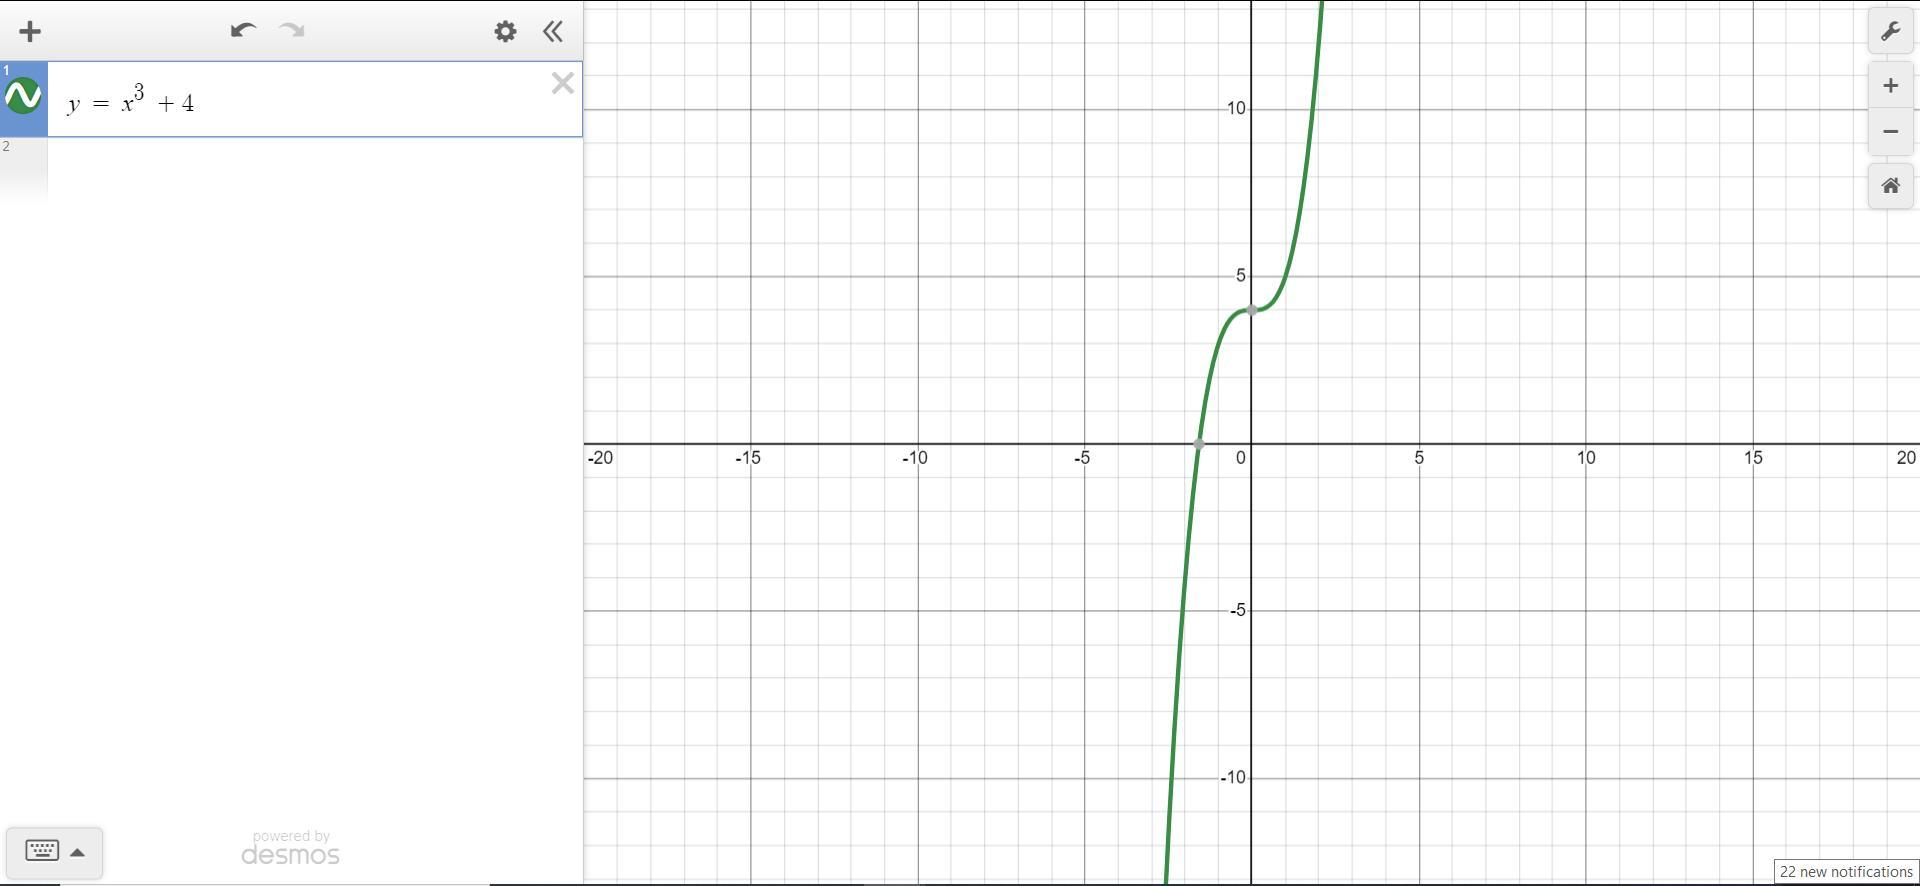 Sketch The Curve Represented By The Parametric Equations (indicate The Orientation Of The Curve), And